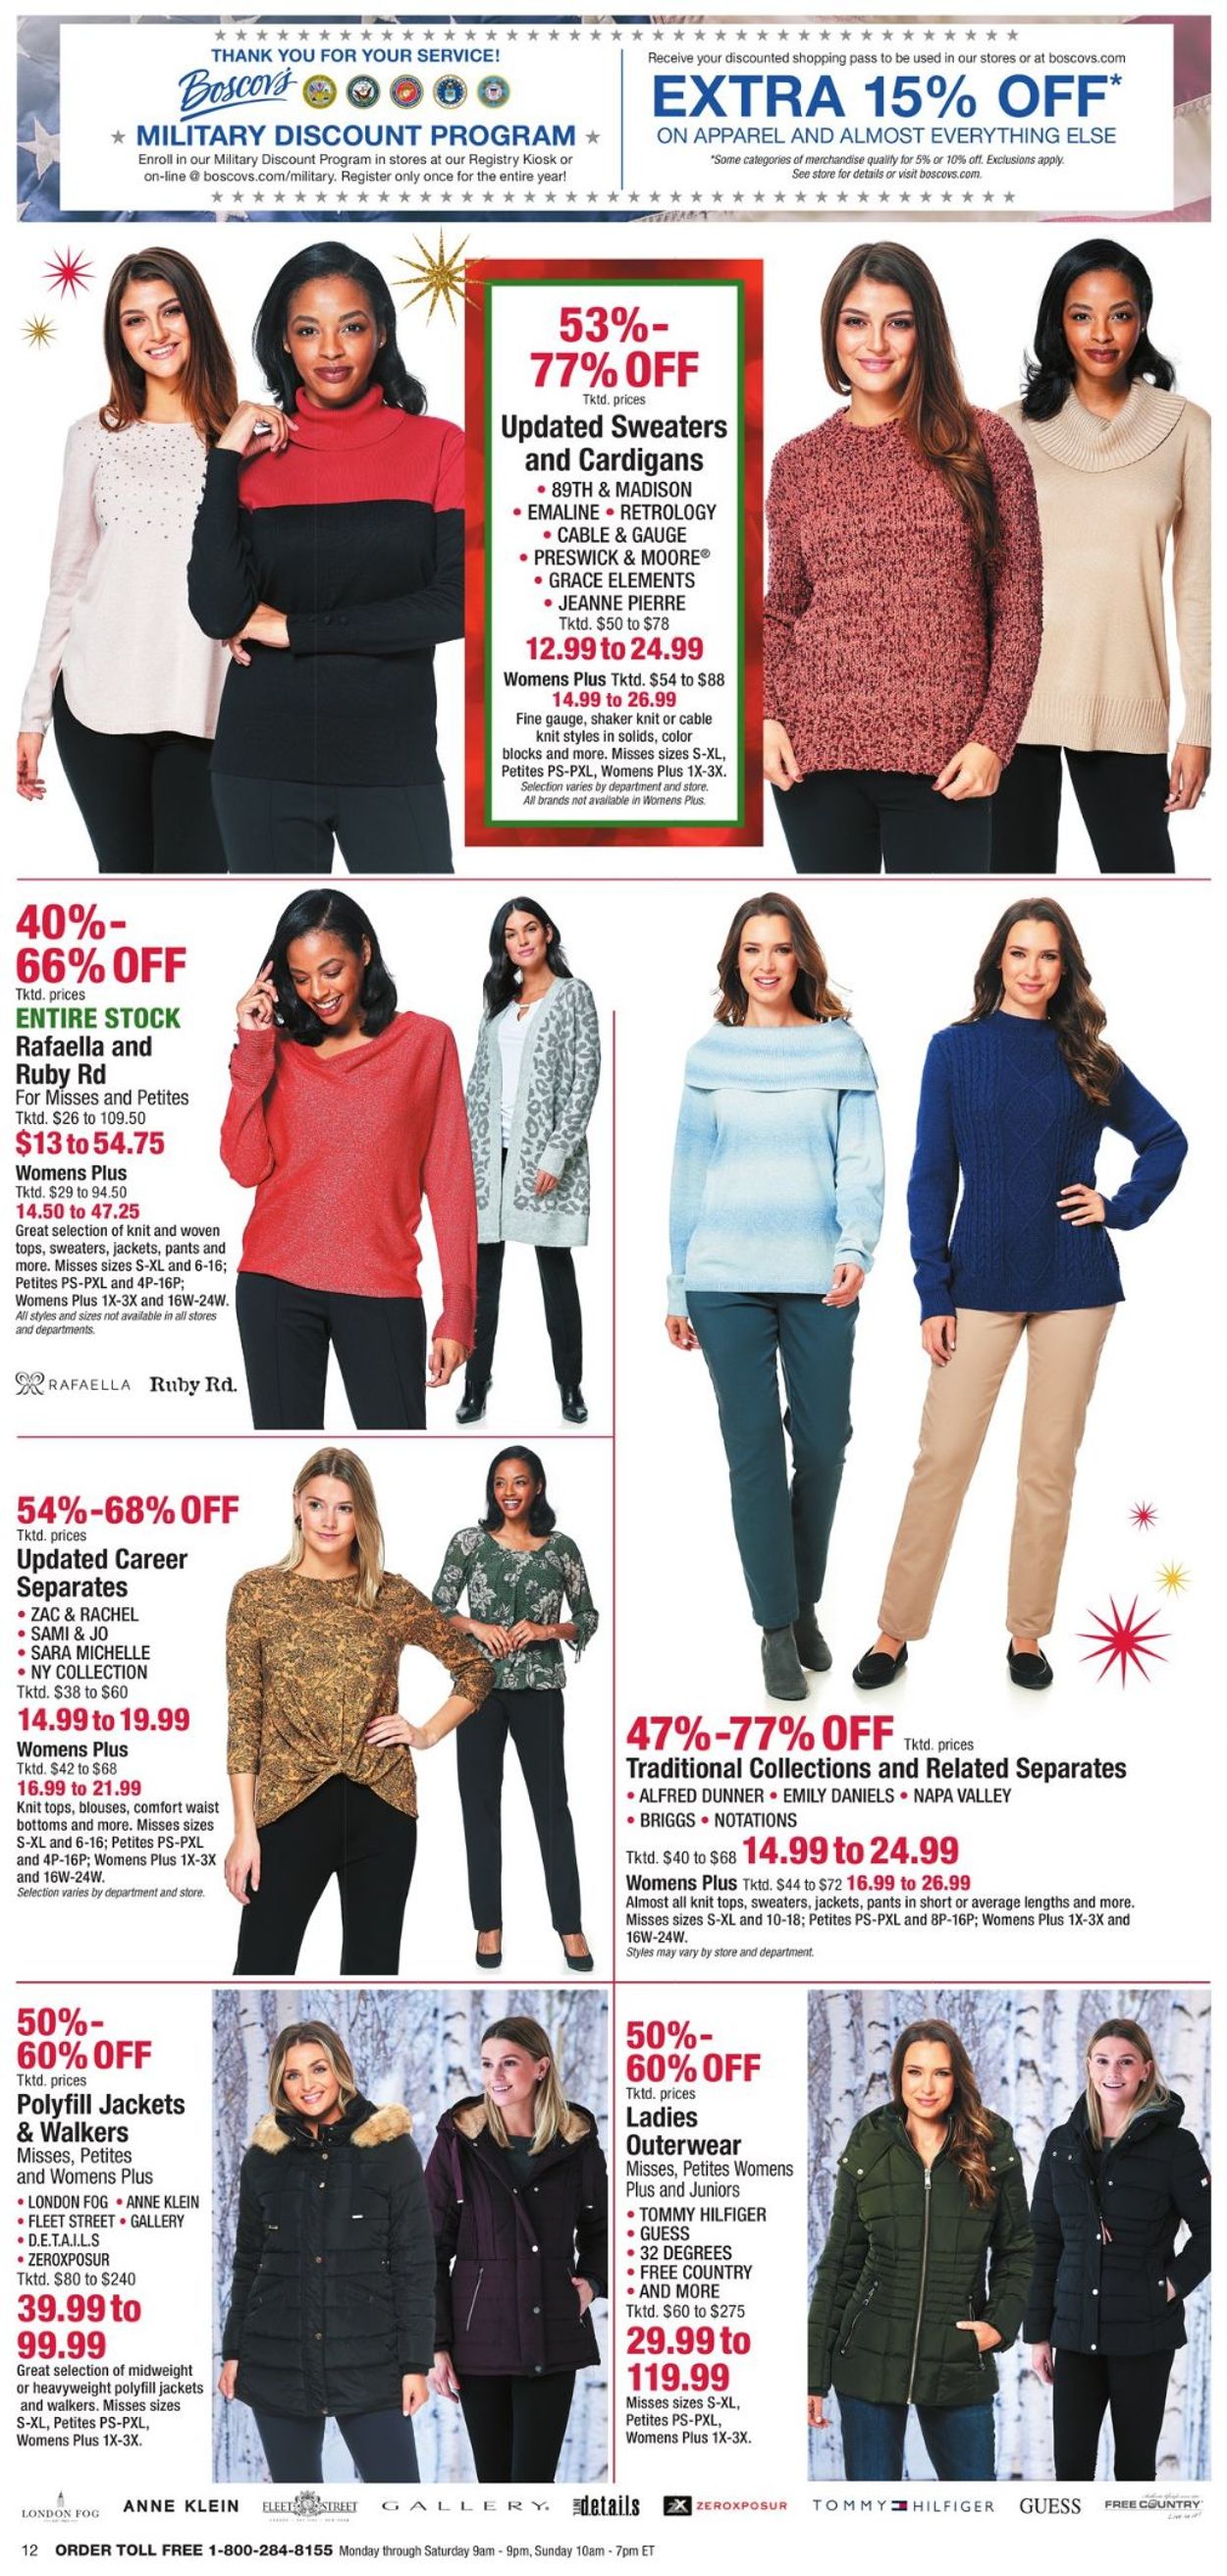 Boscov's Current weekly ad 12/03 - 12/09/2020 [12] - frequent-ads.com